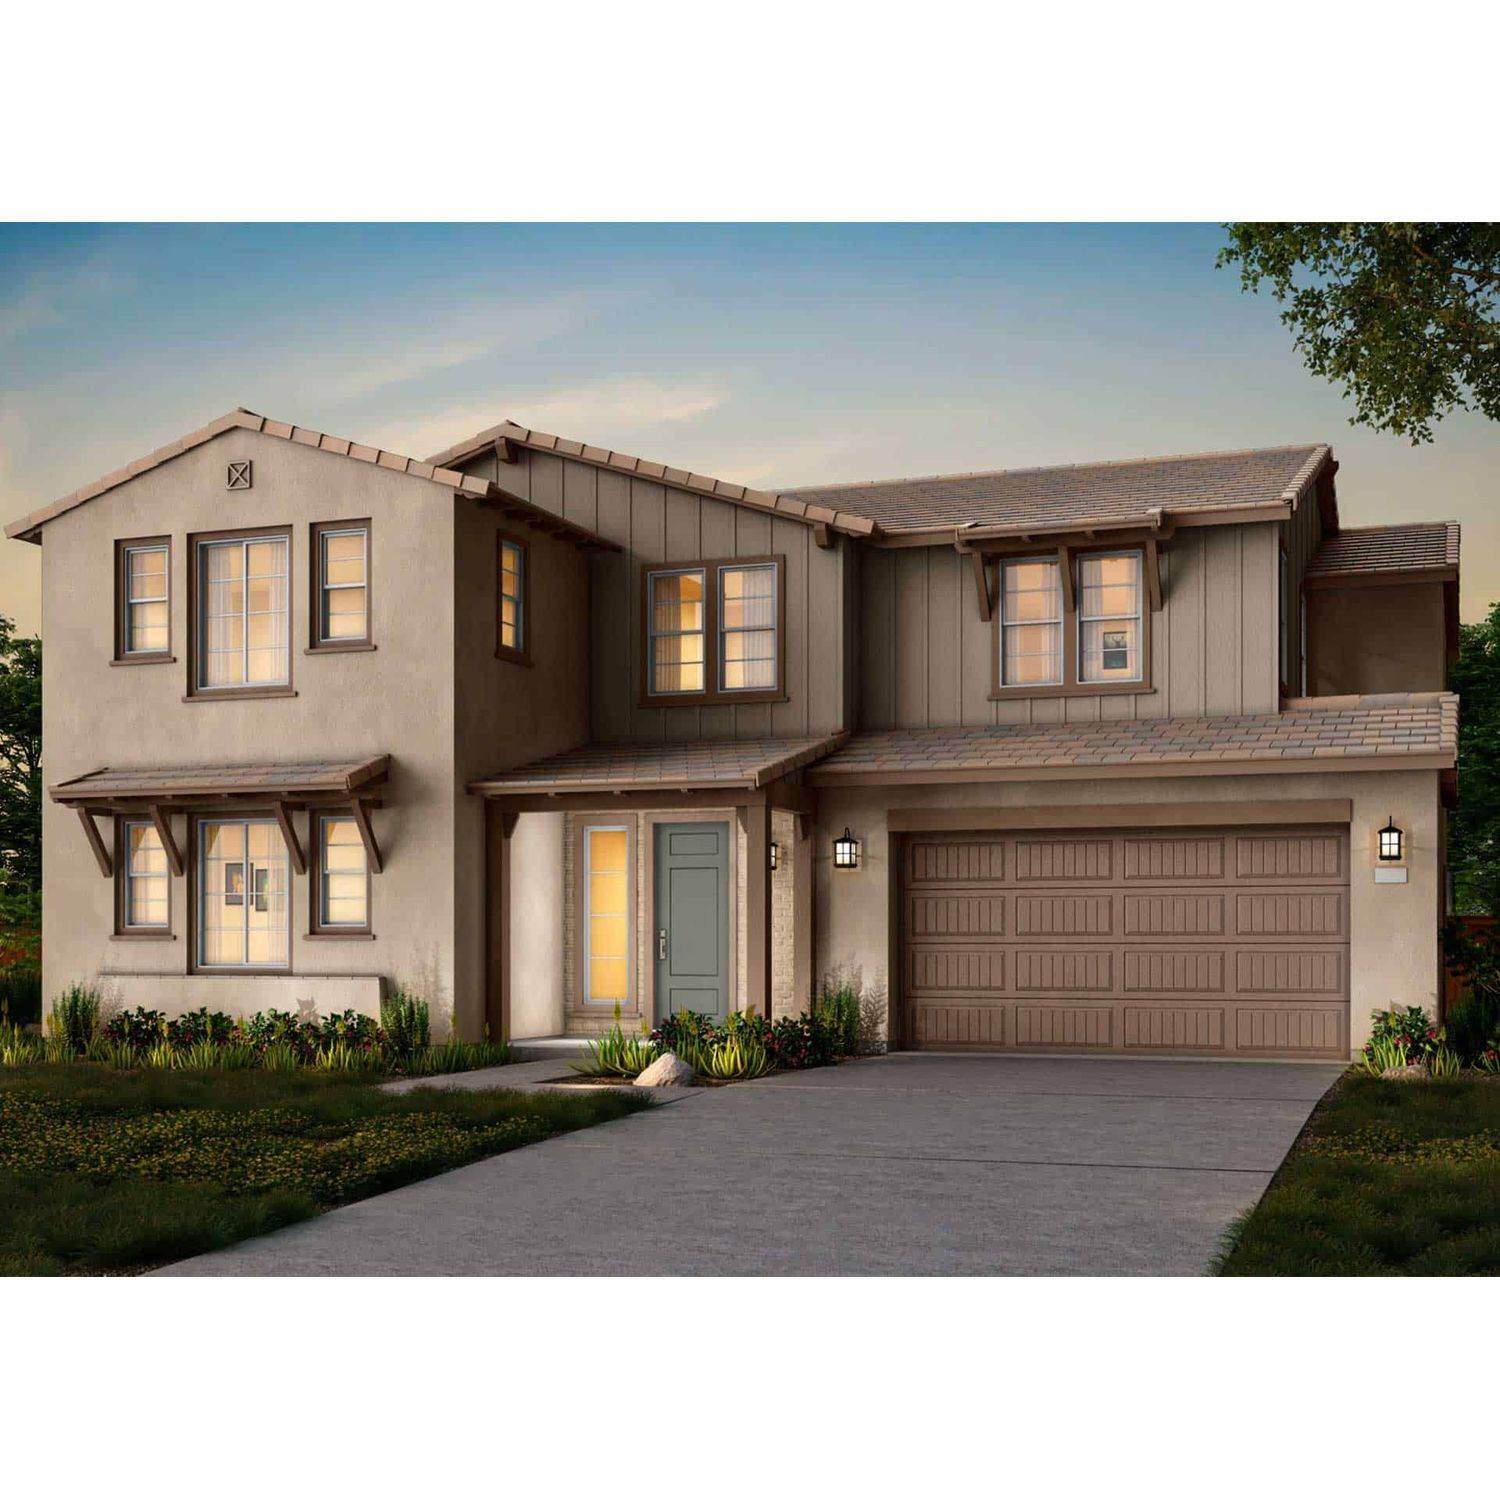 9. The Cove at River Islands building at 2799 Orion Court, Lathrop, CA 95330